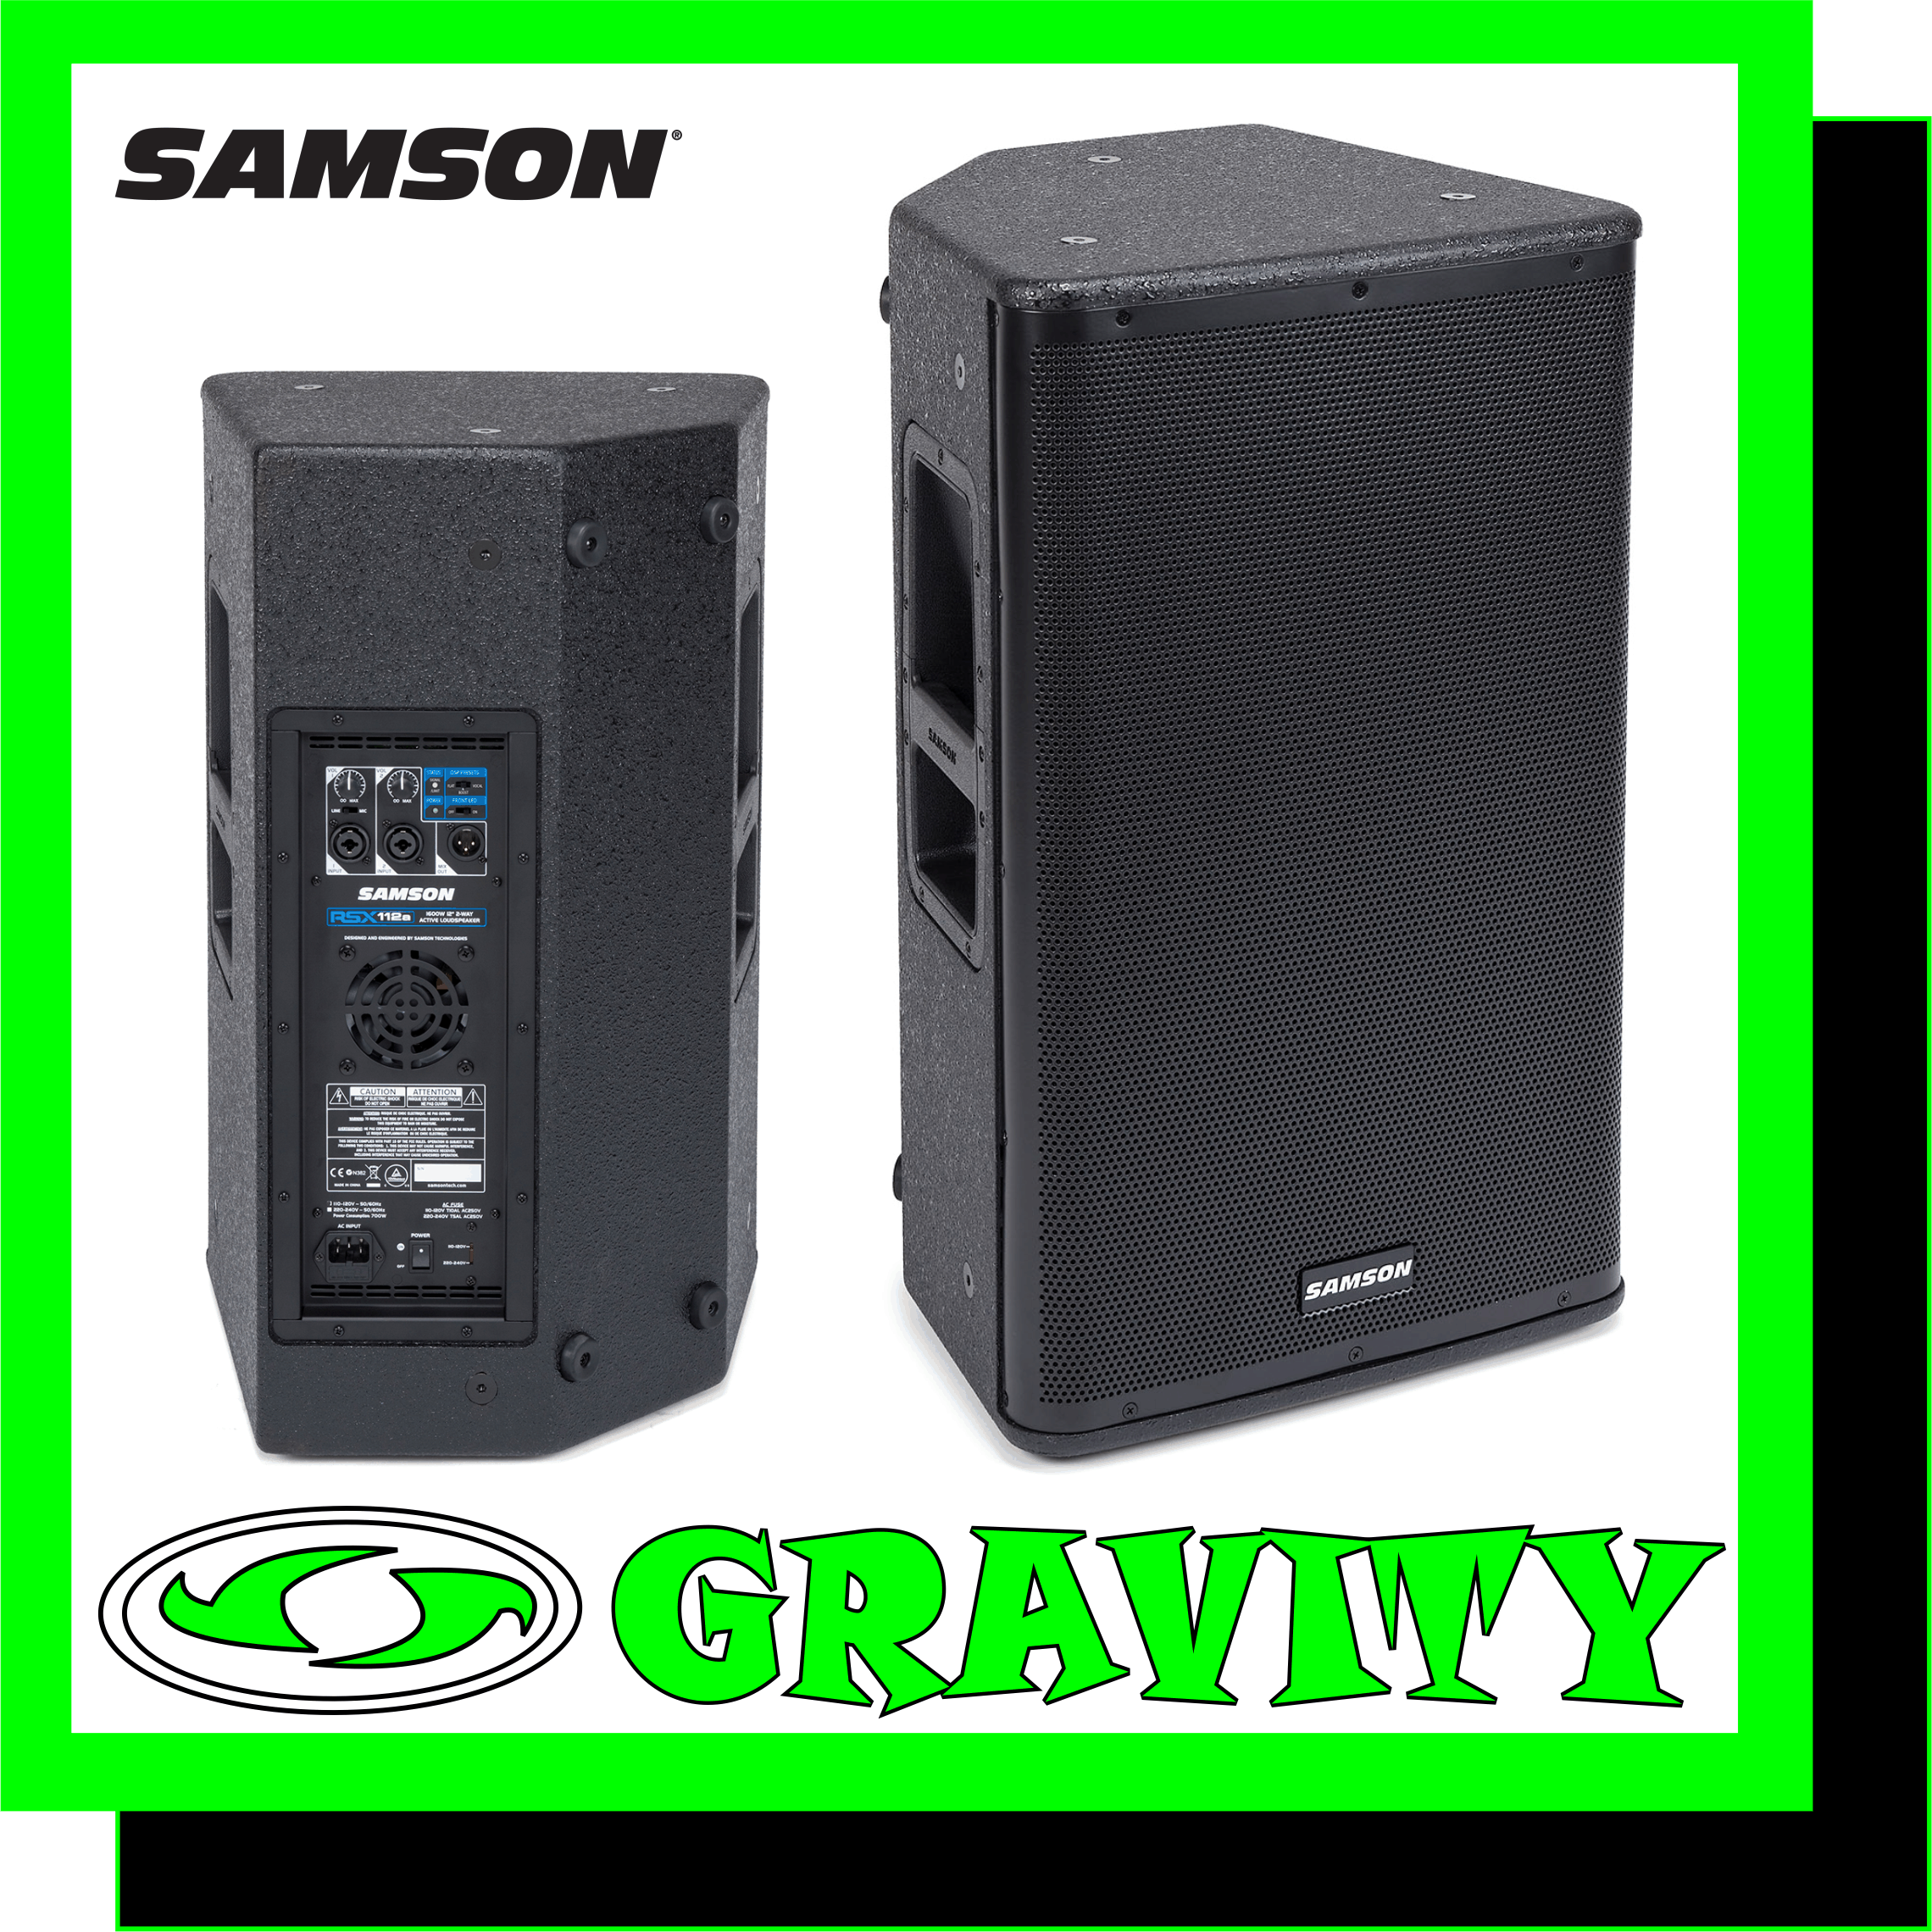 Place Of Power. Samson's RSX112A 2-Way Active Loudspeaker delivers 1,600 watts of output power and impeccable sound quality. The RSX112A combines 9-layer plywood cabinet construction with ultra-efficient Class D power and advanced Digital Signal Processing technology to provide unrivaled performance to live sound professionals.  Featuring Samson's proprietary R.A.M.P. (Reactive Alignment, Maximum Protection) DSP technology, the RSX112A employs Reactive Alignment filters to enhance transducer performance. The DSP also offers Maximum Protection to the speaker's components via thermal and over current sensors. Along with a 12" low frequency driver, the speaker features a single 1.75" PETP Celestion® compression driver mounted within a dispersion efficient waveguide, adding a wide and balanced sound field to the RSX design.  In addition to its ultra-durable cabinet construction, the RSX112A features a perforated steel grill, 1 3/8" pole mount receptacle and two rubberized carry handles. Connectivity includes two XLR-1/4" combo input channels with a selectable Mic/Line switch on Channel 1. Additionally, an XLR Link output is available for stereo operation. The speaker performs equally as well as a floor monitor or main system speaker. For situations that require permanent speaker installation, the RSX112A is furnished with twelve M10 (10mm) fly points.   -Lightweight, Class D 2-way active loudspeakers -1,600 watts of output power -Peak SPL of 133dB -9-layer plywood cabinet construction -Samson’s R.A.M.P. DSP technology -12" low frequency driver -1.75" PETP Celestion® compression driver -Two XLR-1/4" combo input channels -Floor monitor positioning option -1 3/8" pole mount receptacle -Twelve M10 (10mm) fly points -Rubberized carry handles -Perforated steel grill -Durable black, textured paint finish